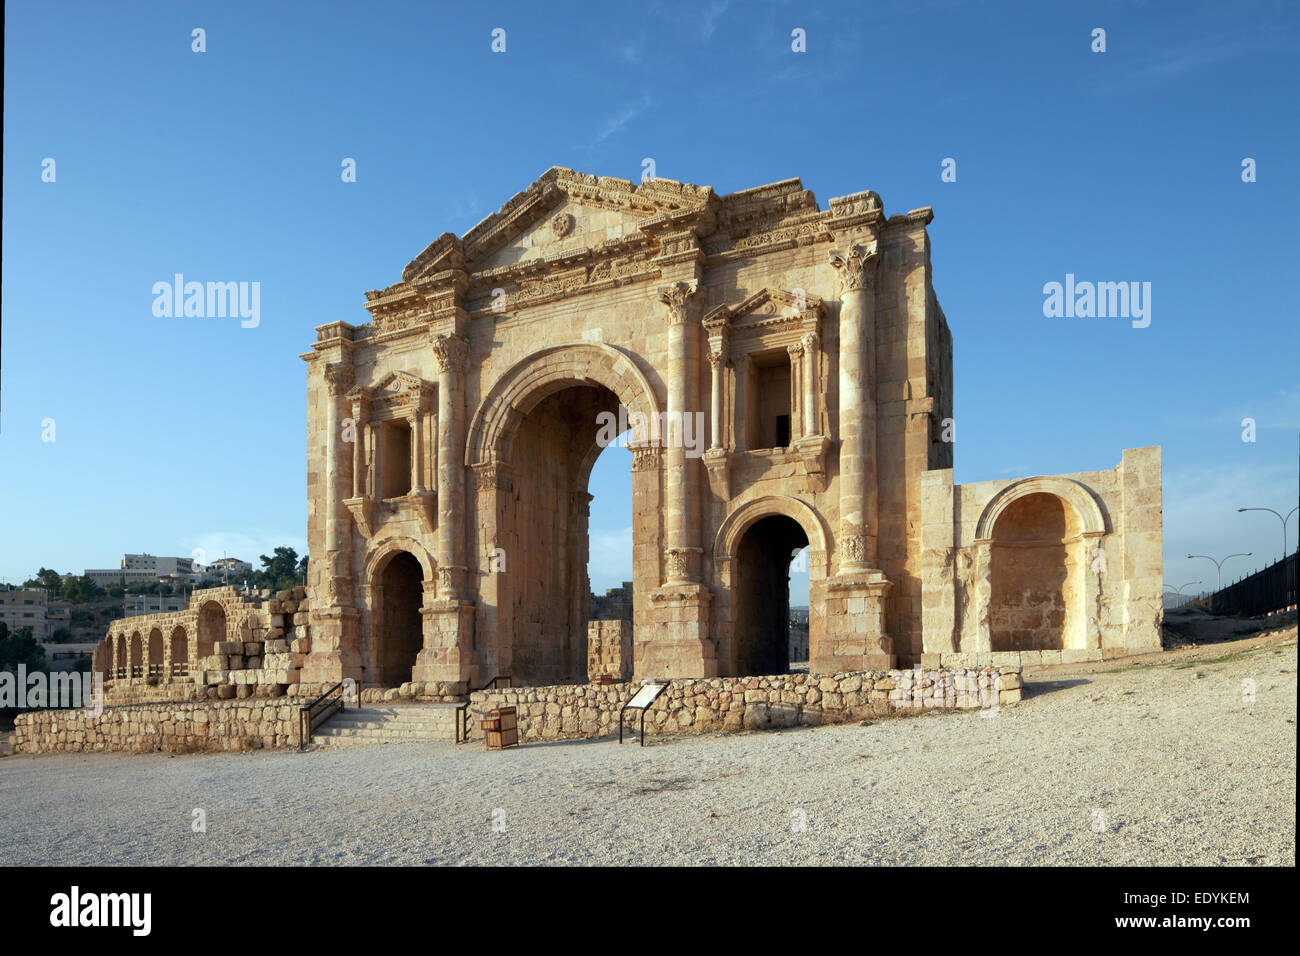 Triumphal arch in honour of Emperor Hadrian, portal, built 129-130 AD, an ancient Roman city of the Decapolis, Jerash Stock Photo